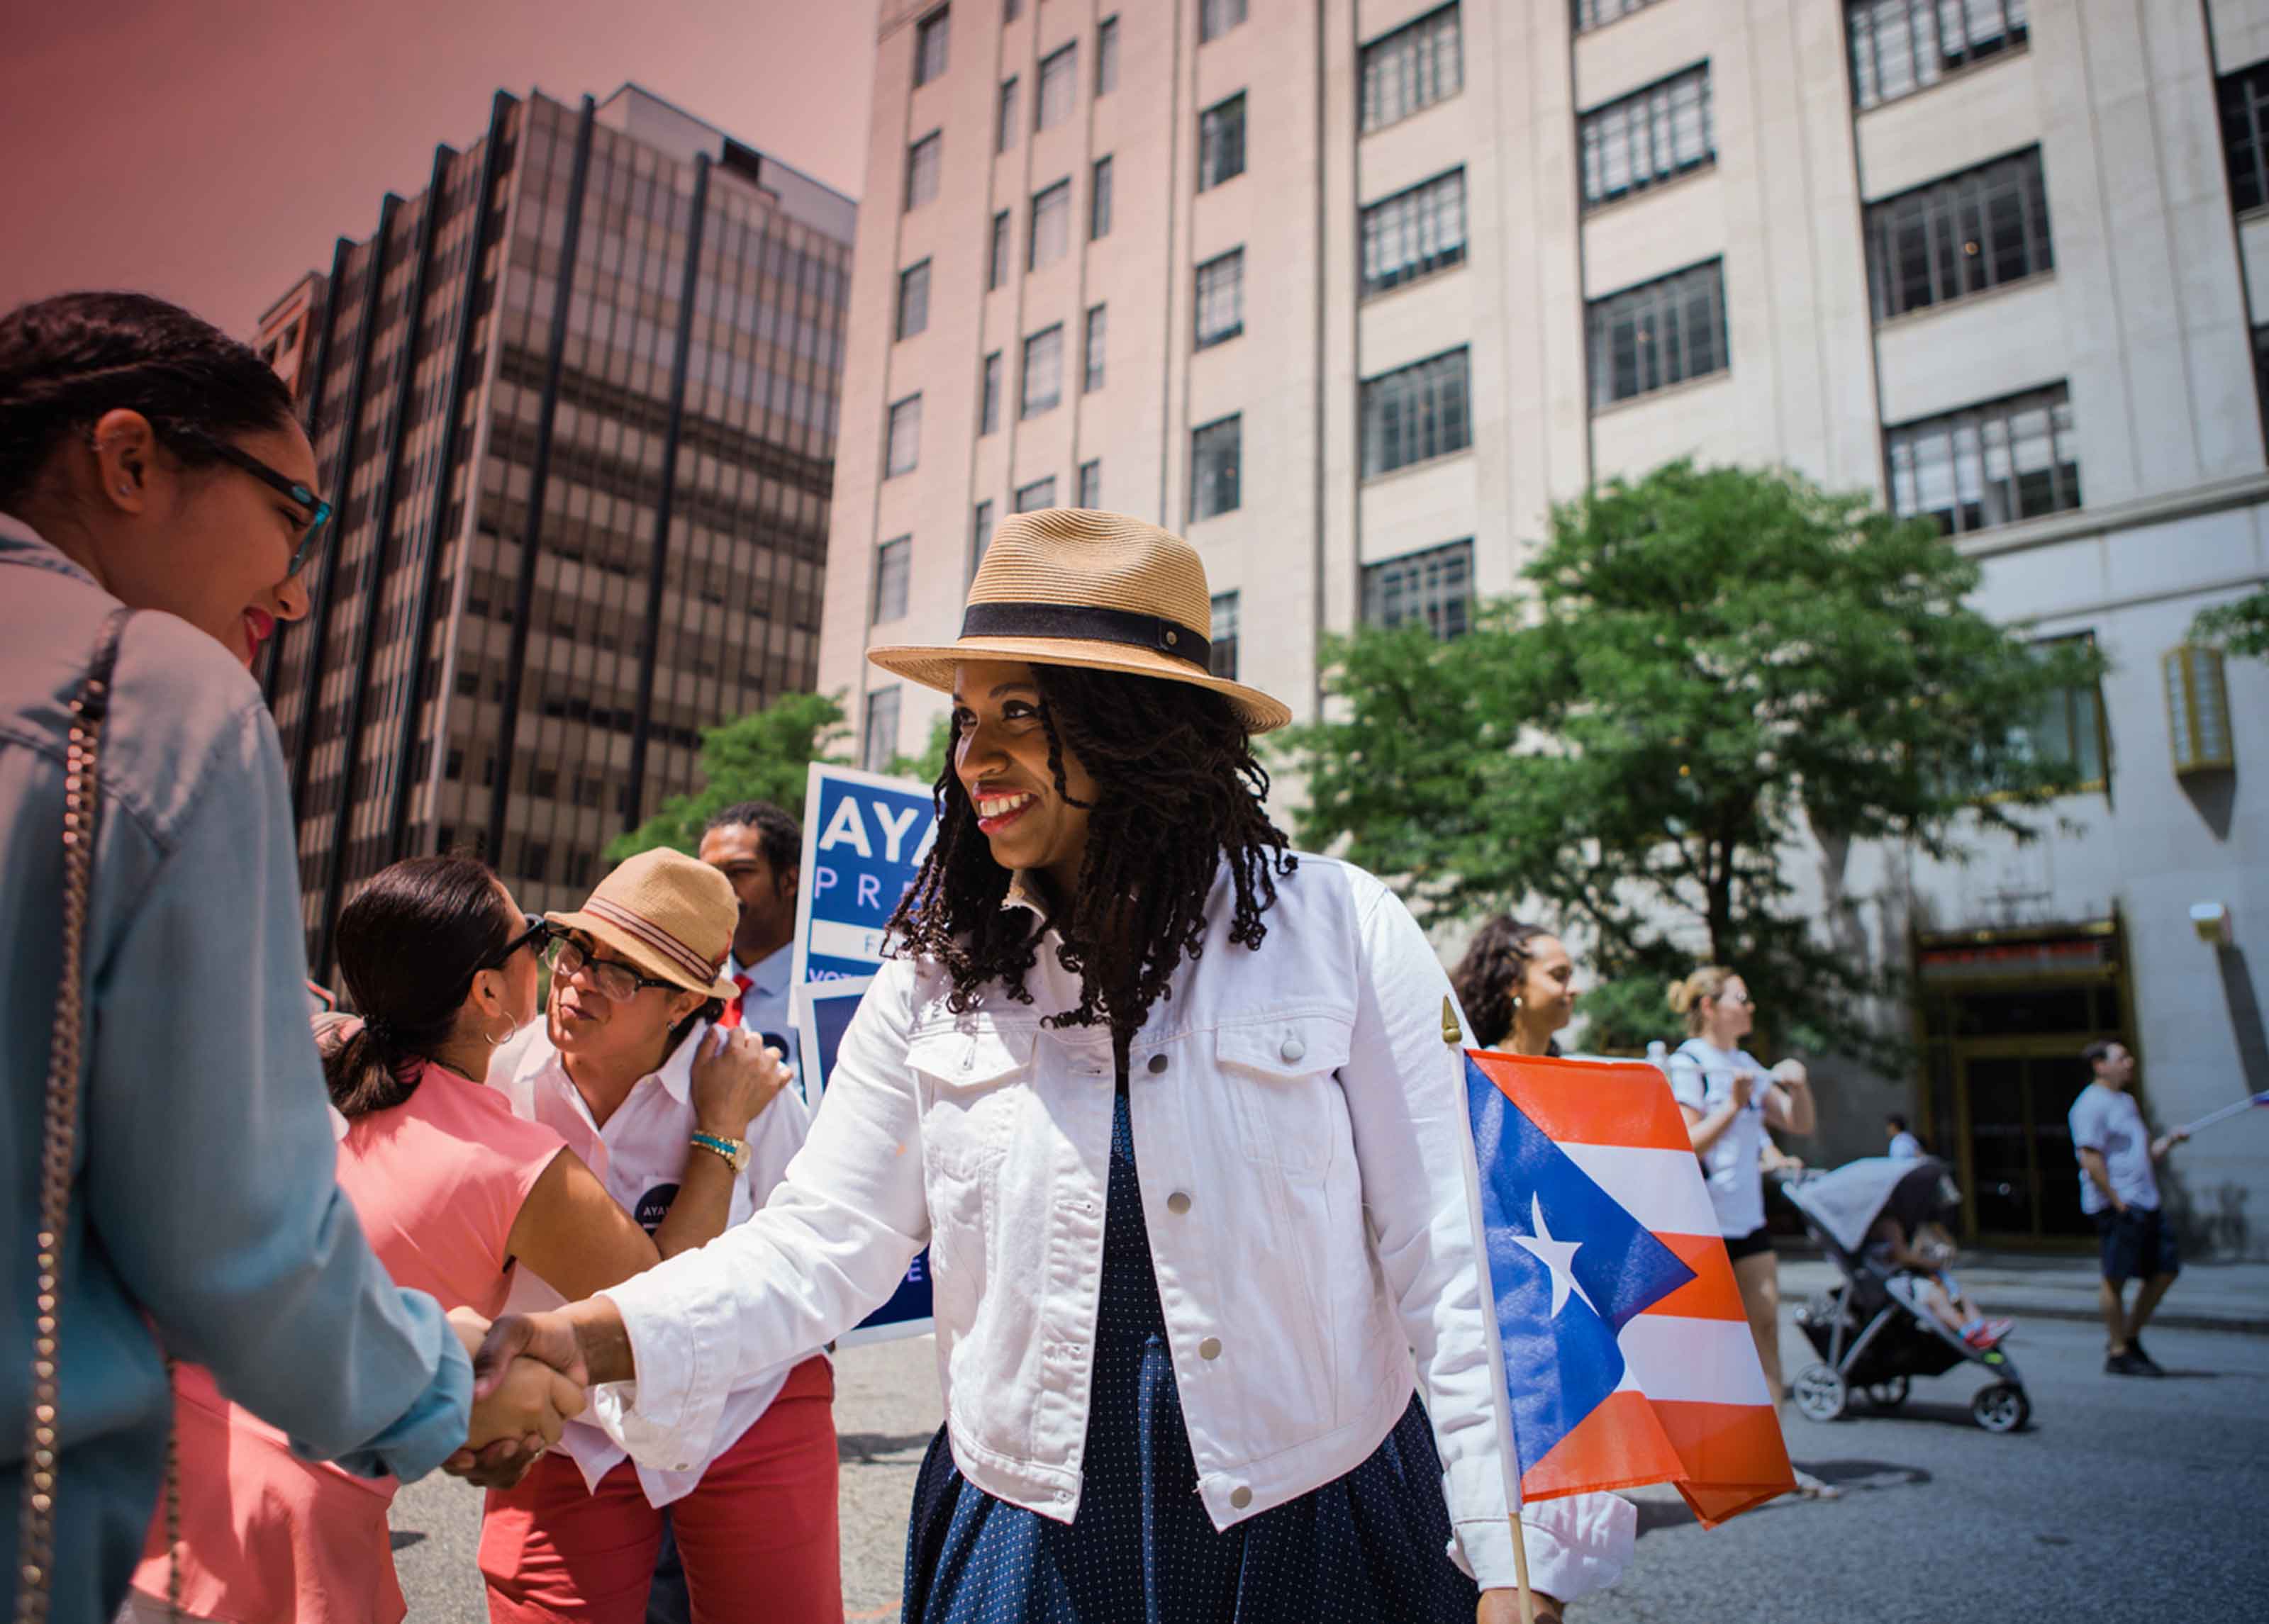 Ayanna Pressley, Massachusetts candidate for the House of Representatives, shakes a supporter's hand at the Boston Puerto Rican parade.